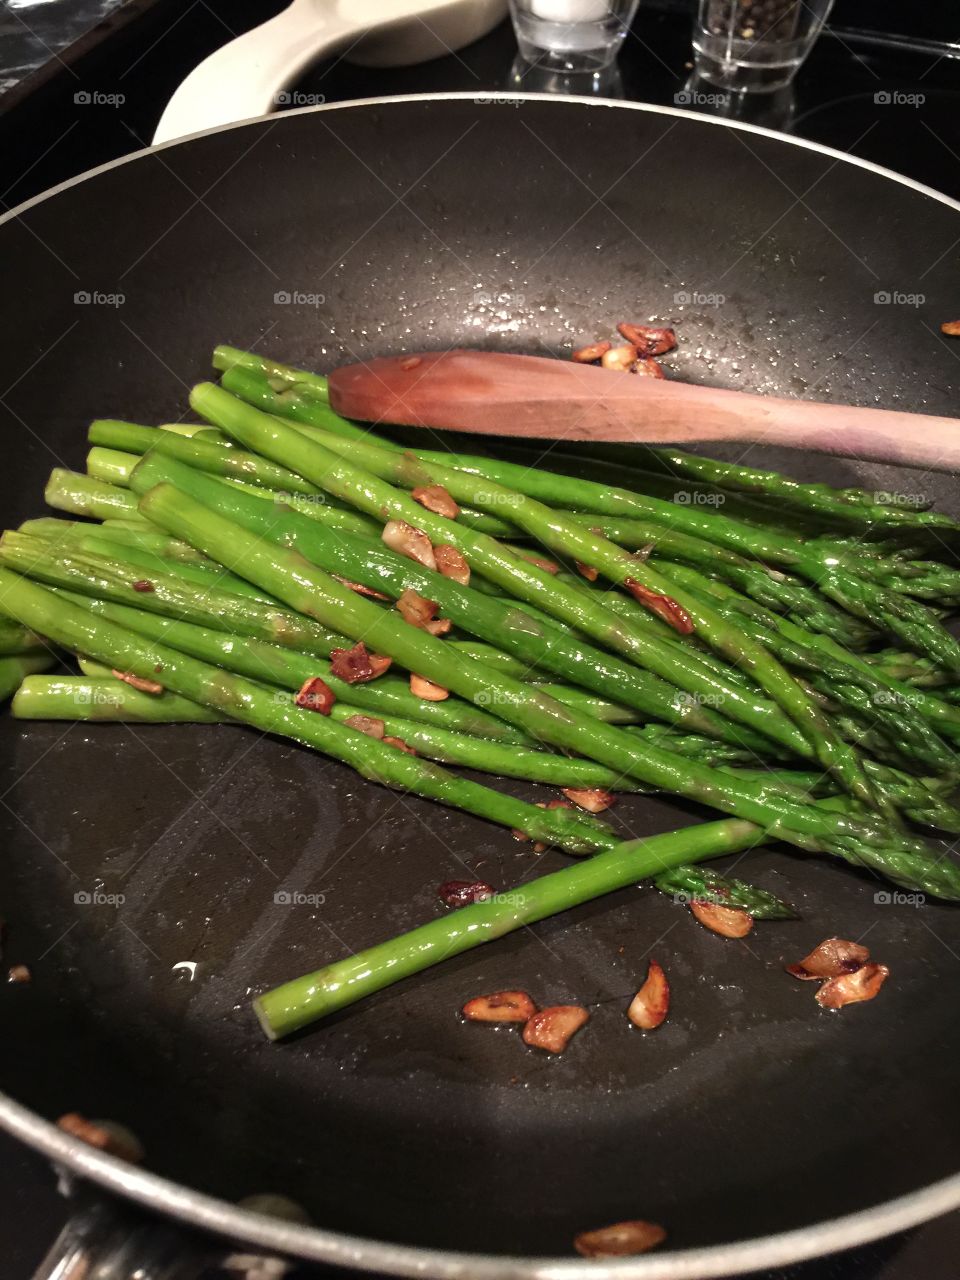 Asparagus . Delicious good for you food.